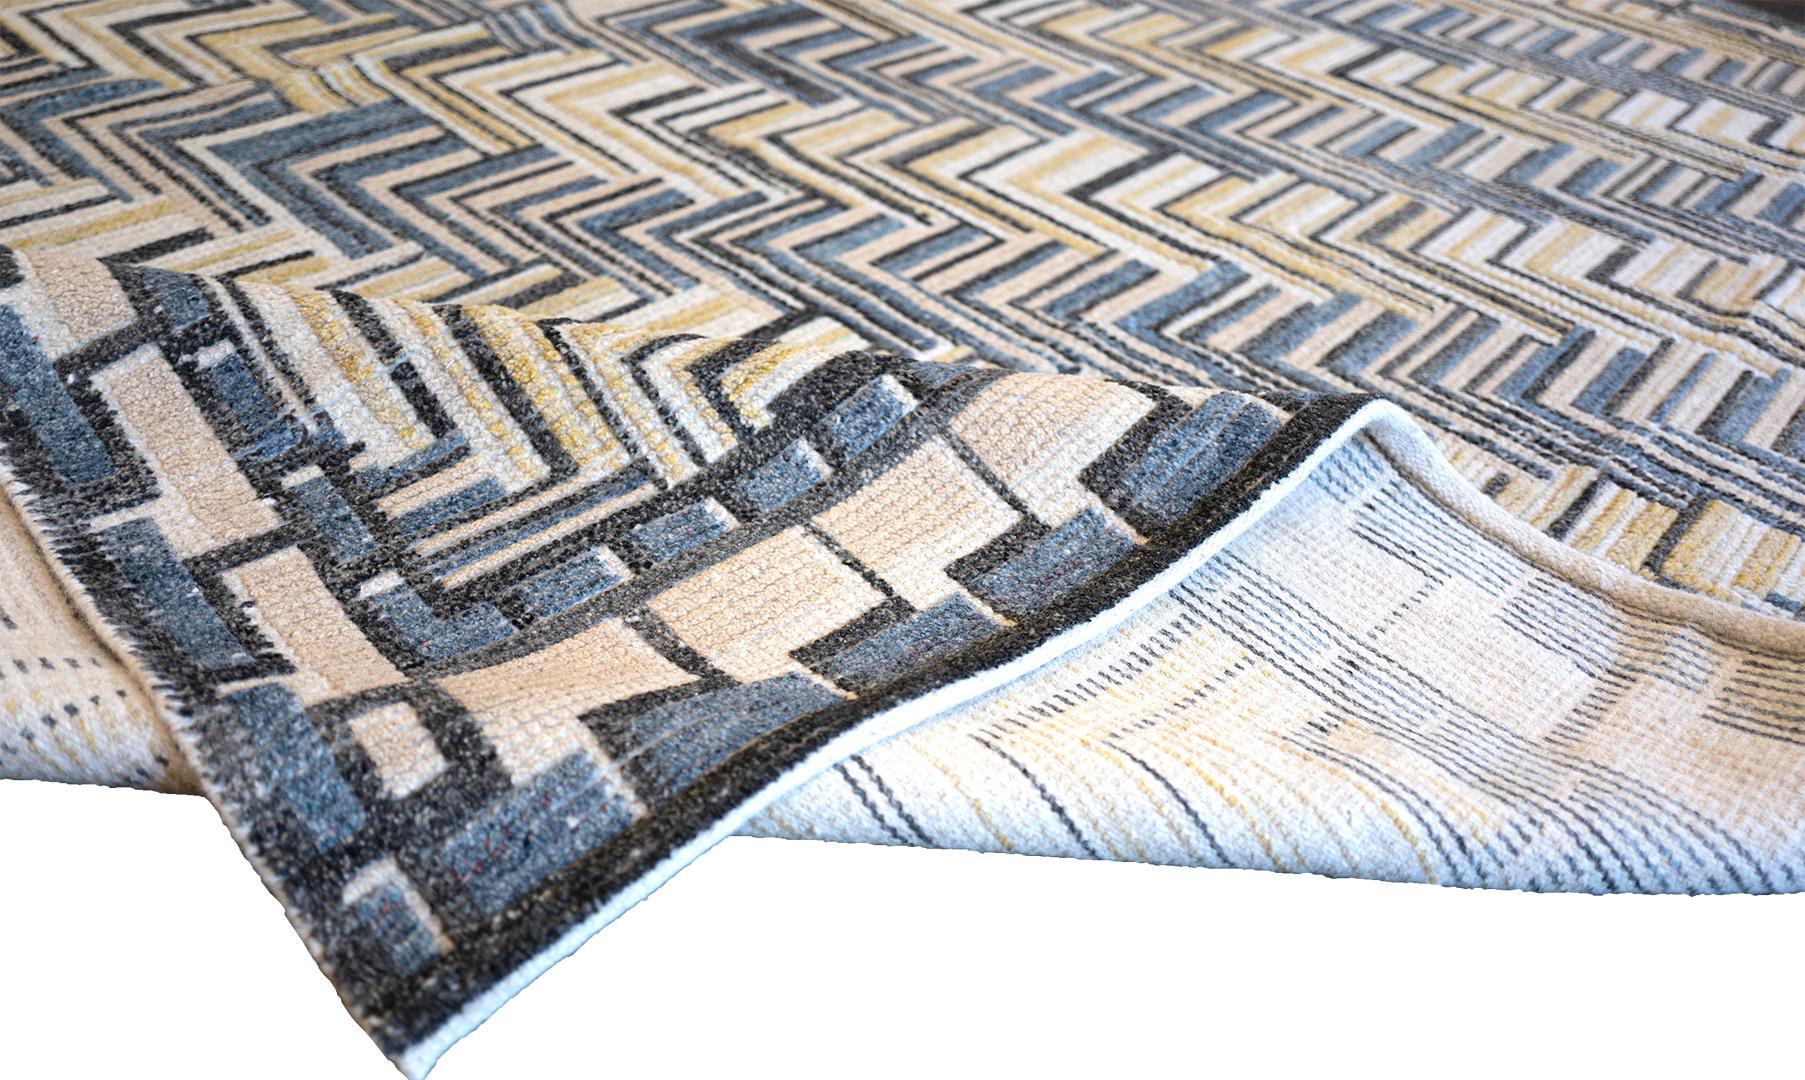 This handwoven Swedish deco style flat-weave rug has an organic yellow, blue, charcoal, and white geometric pattern, in a border of blue, taupe, and charcoal dashes.